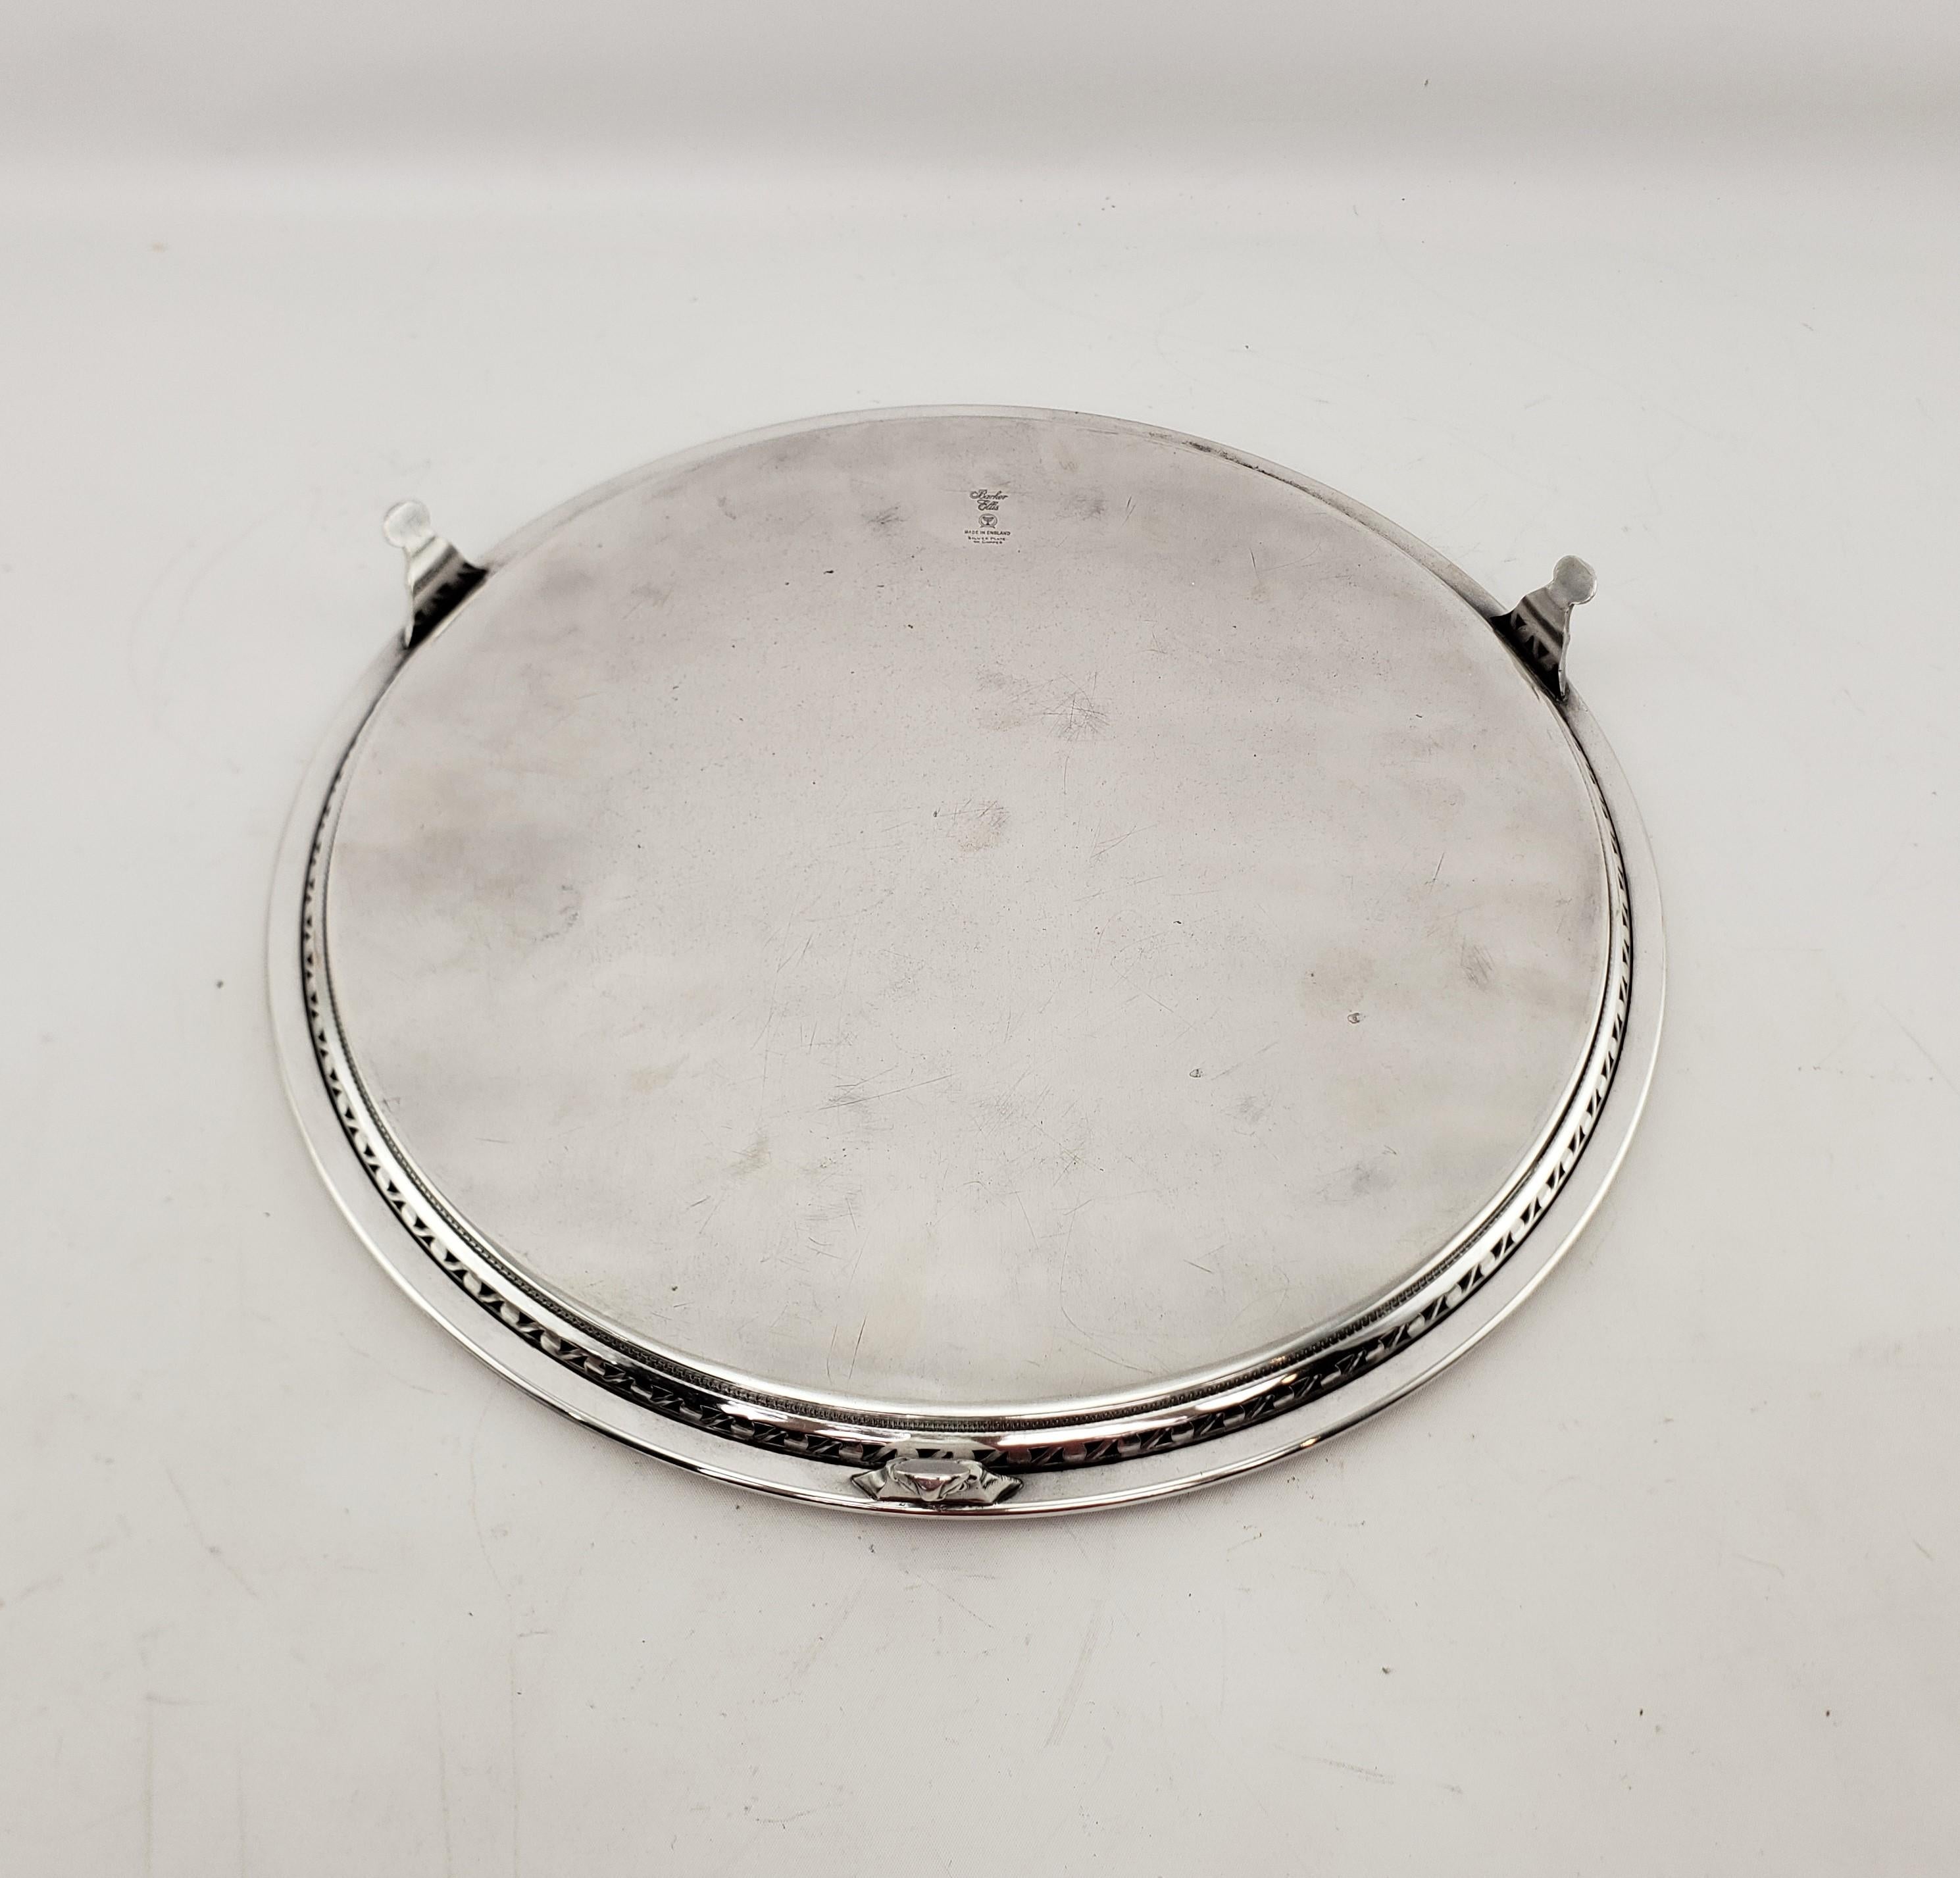 Antique Silver Plated Barker Ellis Round Footed Serving Tray or Salva 4